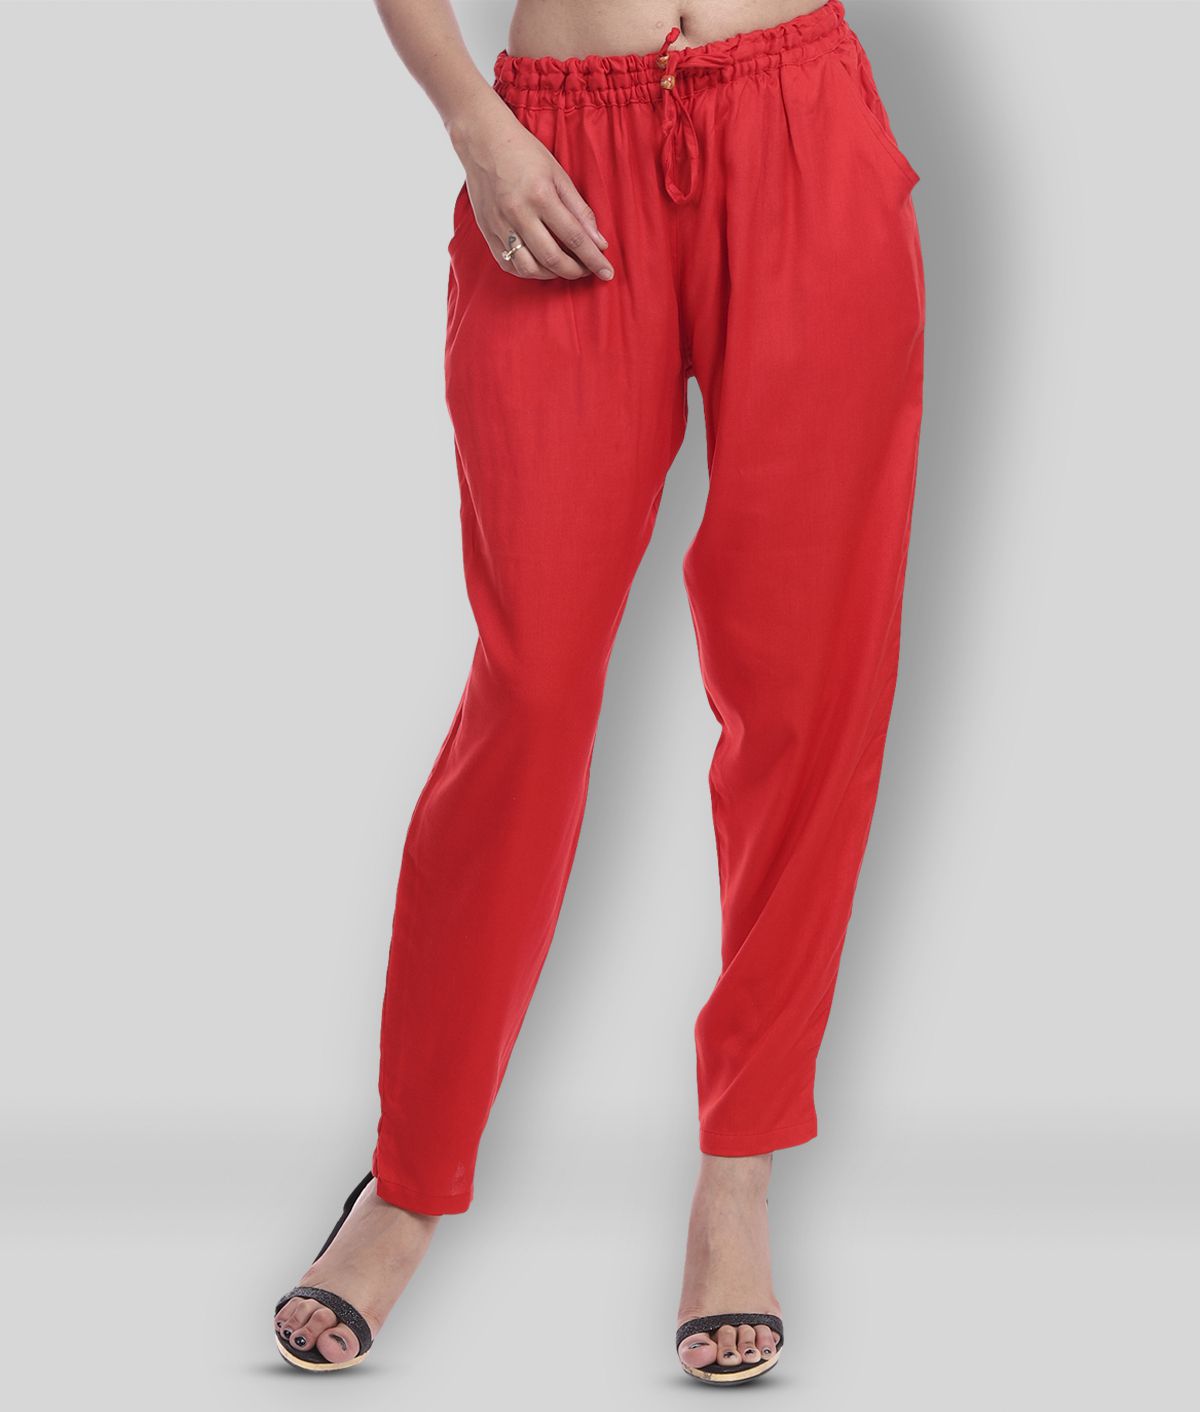     			Lee Moda - Red Rayon Straight Fit Women's Casual Pants  ( Pack of 1 )